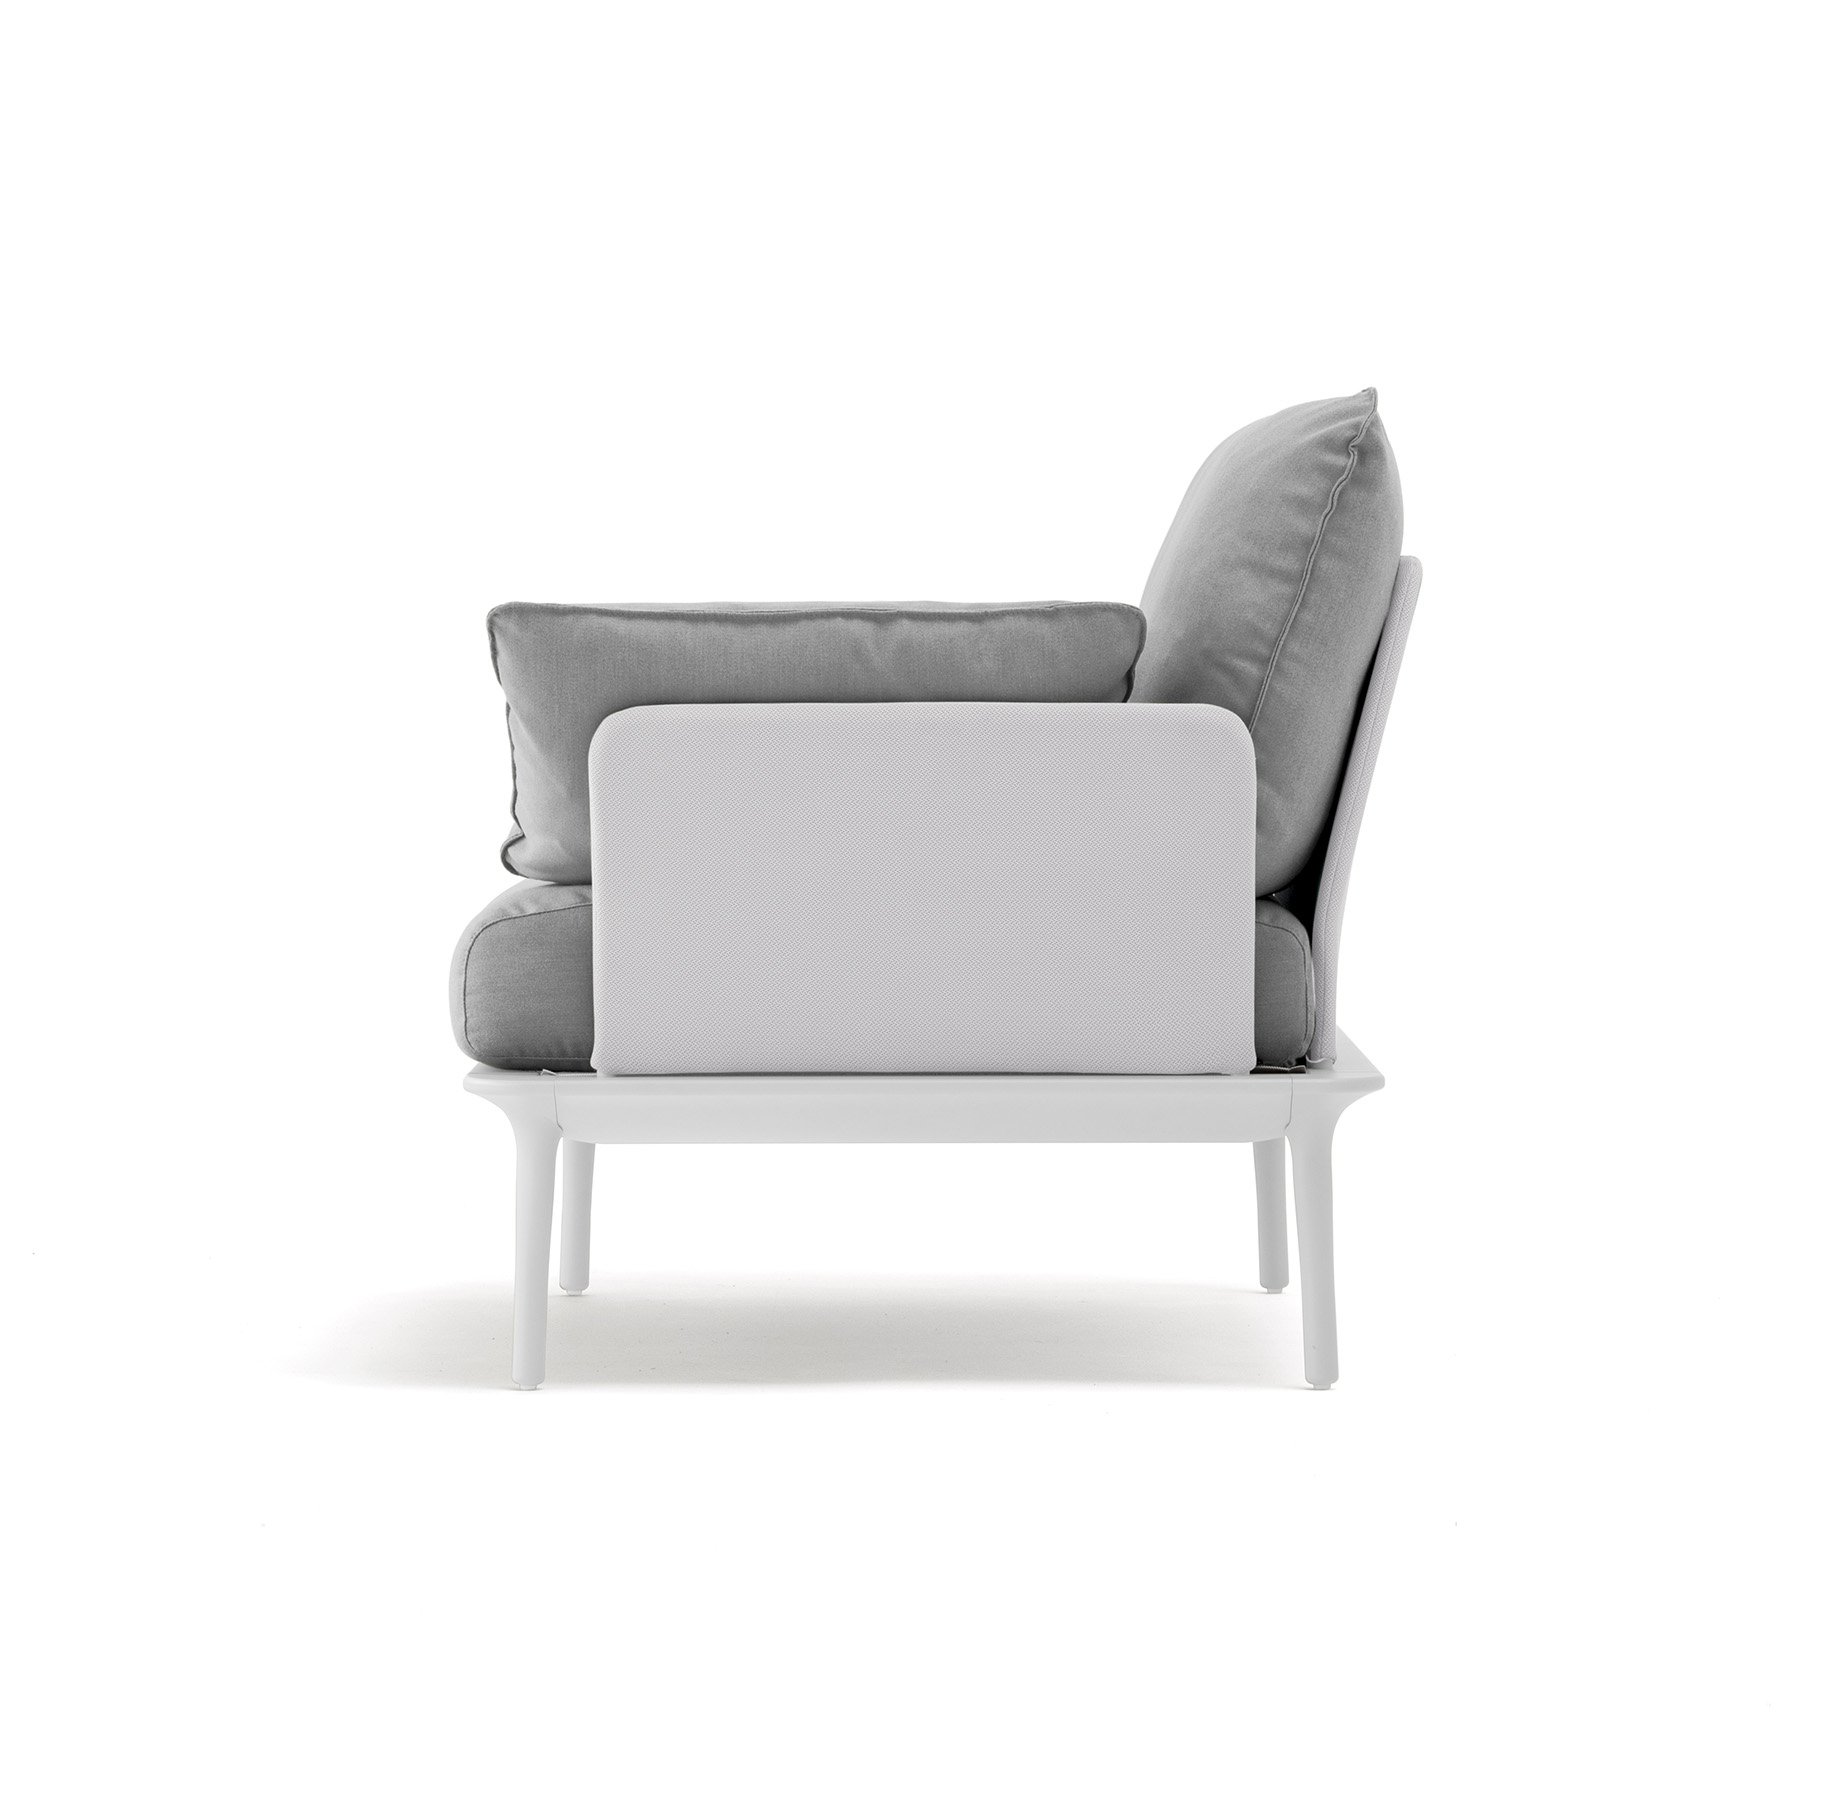 Reva Lounge Chair from Pedrali, designed by Patrick Jouin